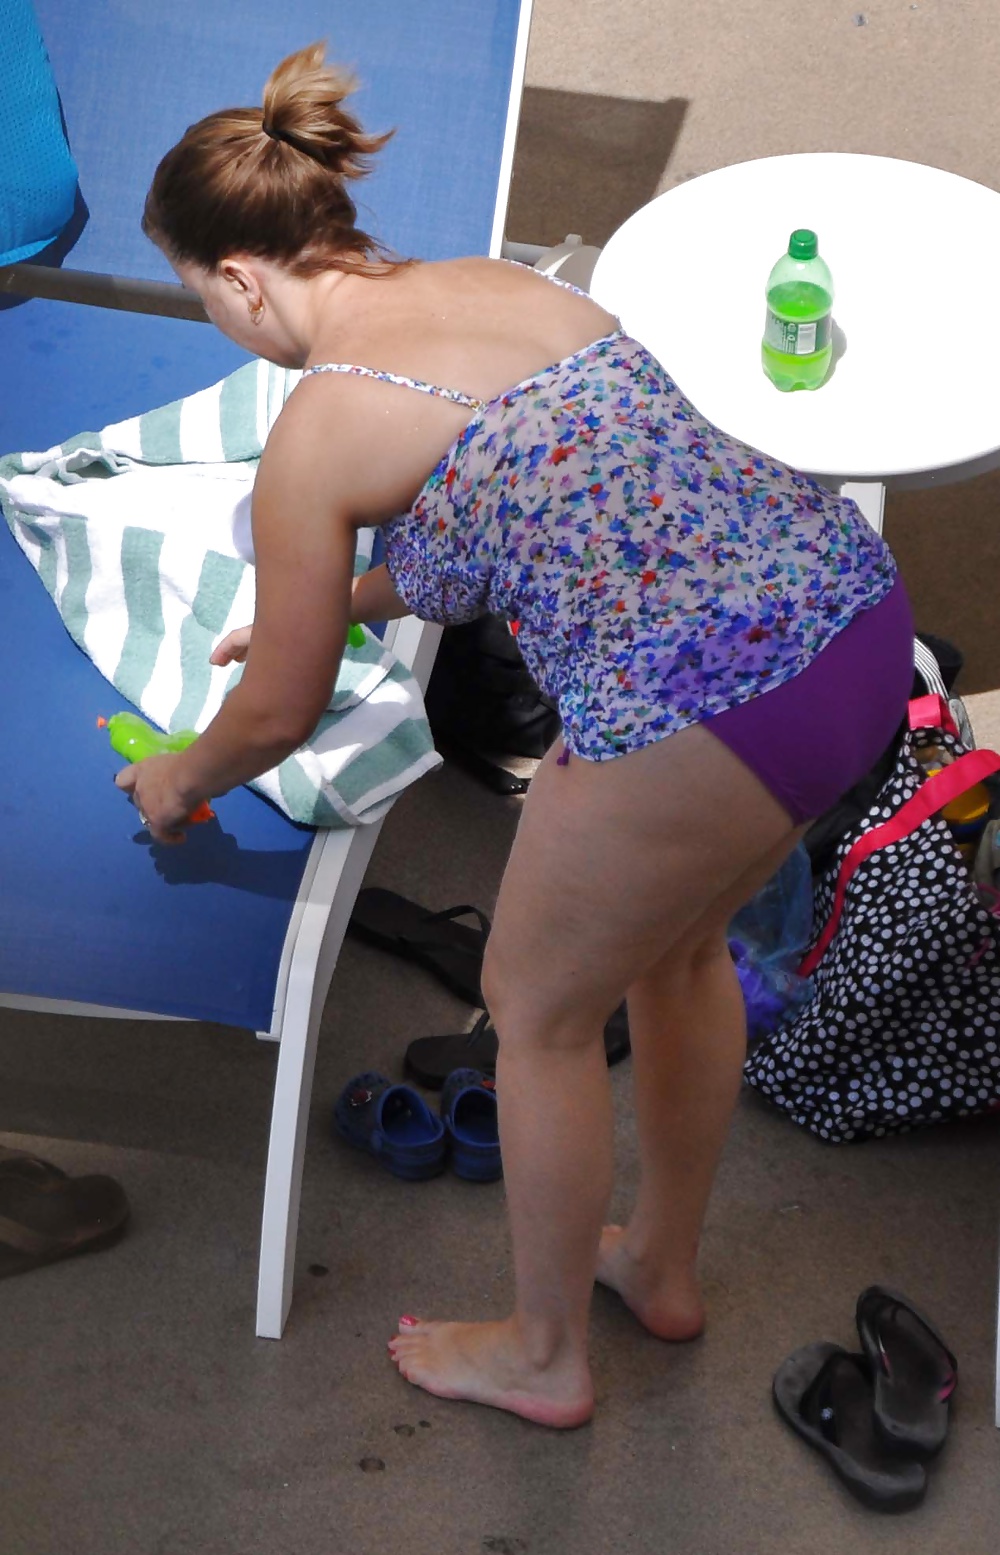 Candid MILF Mom Fat Tits Ass by Pool #39786470